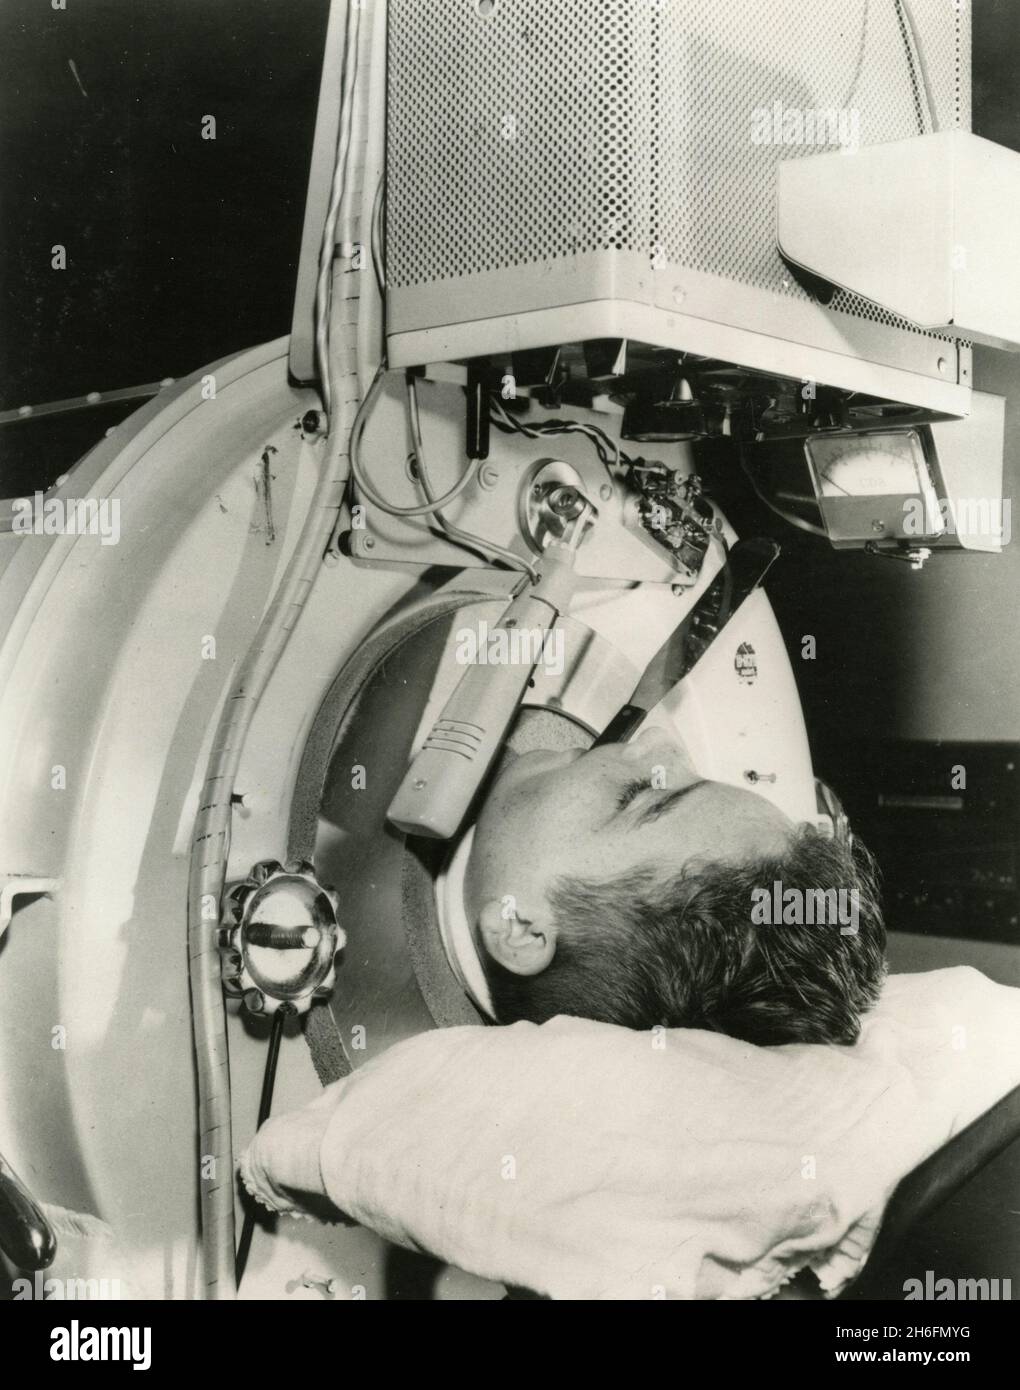 A 13-year-old bulbar poliomyelitis victim relaying emergency messages from his iron lung, USA 1964 Stock Photo